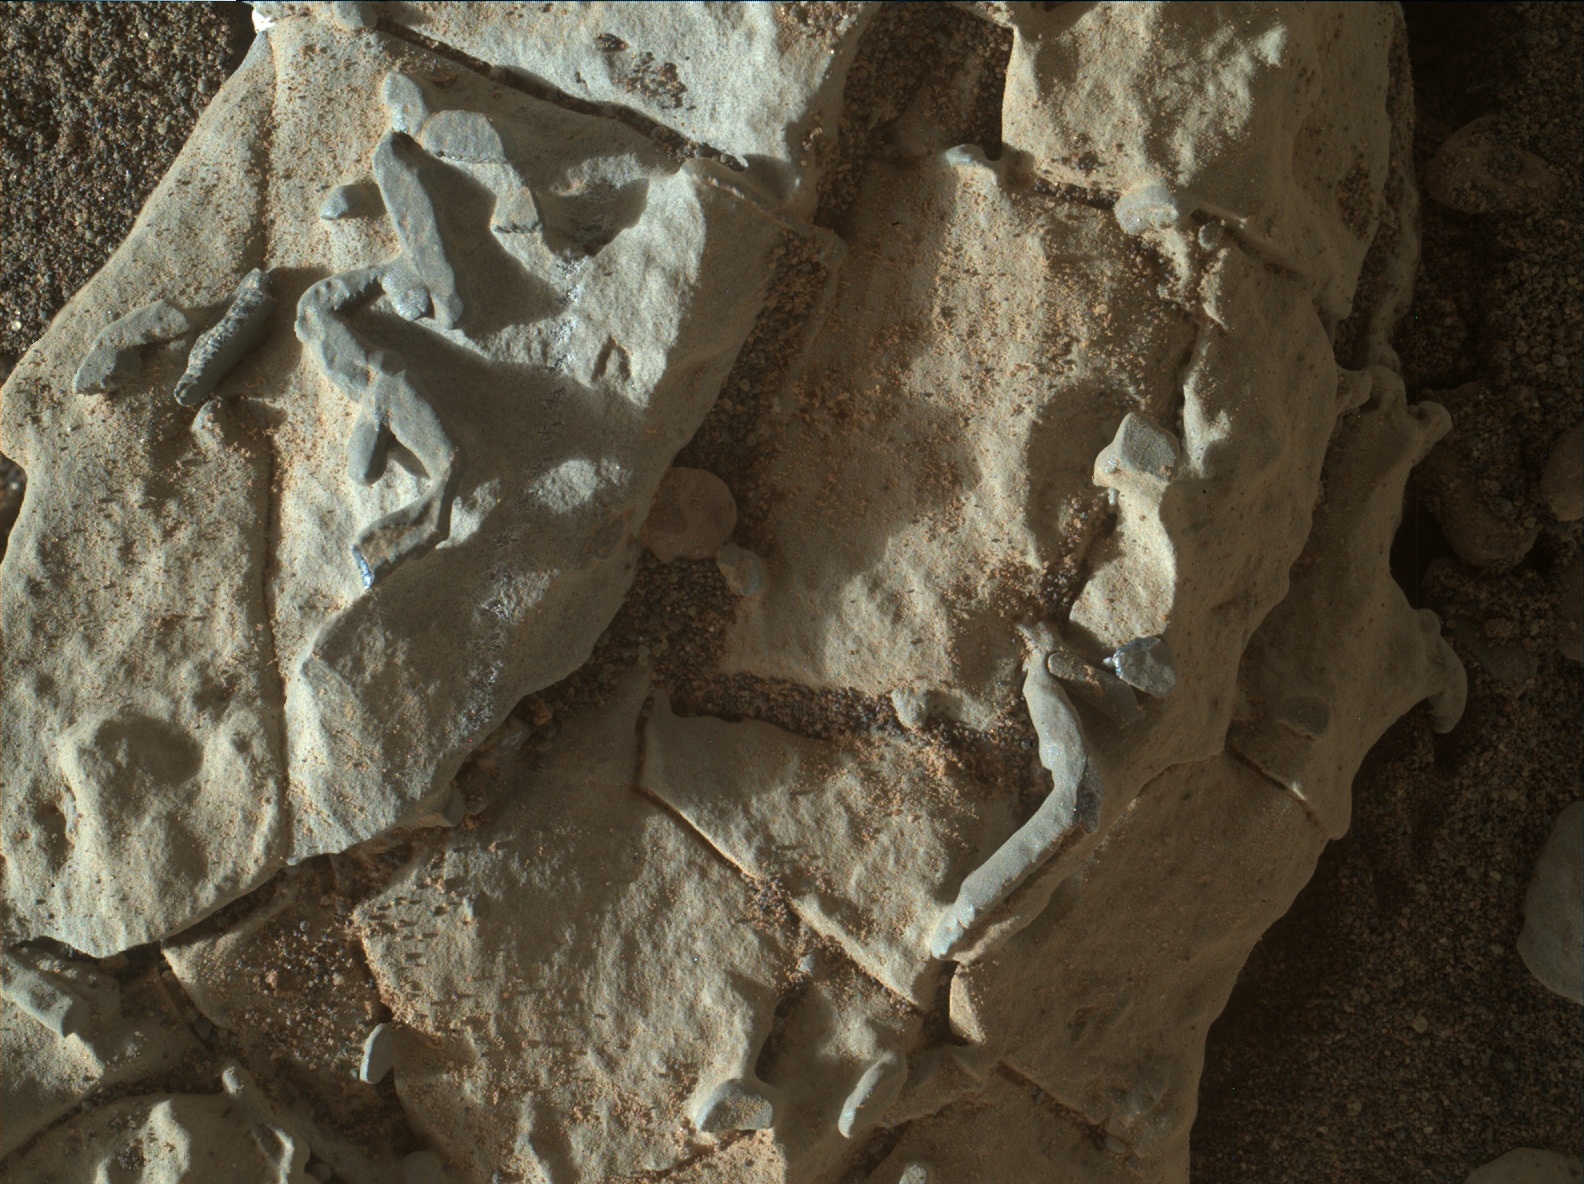 Nasa's Mars rover Curiosity acquired this image using its Mars Hand Lens Imager (MAHLI) on Sol 1923